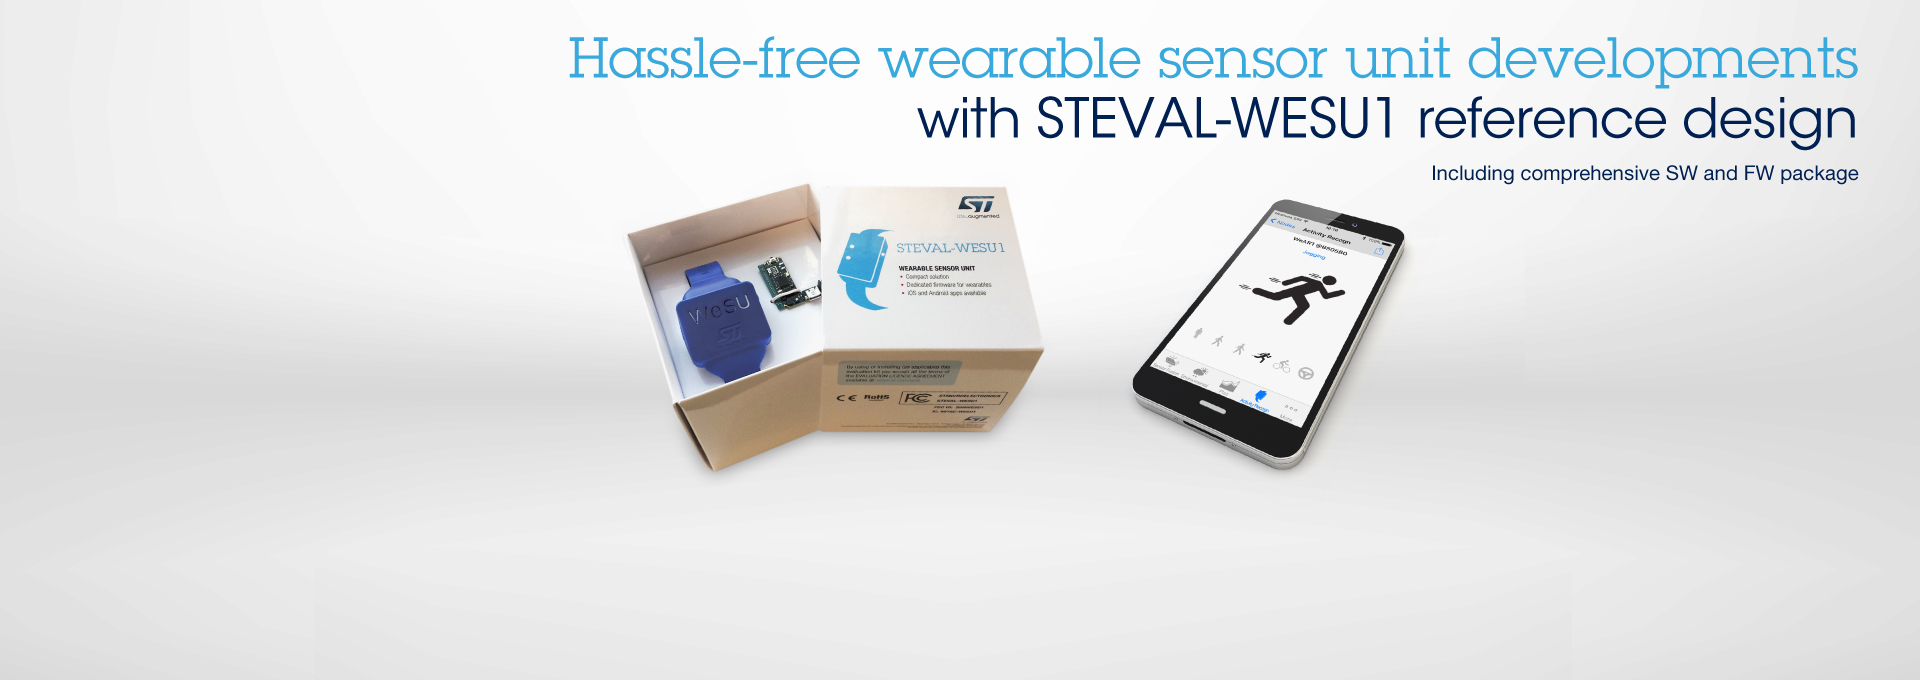 STMicroelectronics Collaborates with Qualcomm on Sensors for Smart Mobile Devices